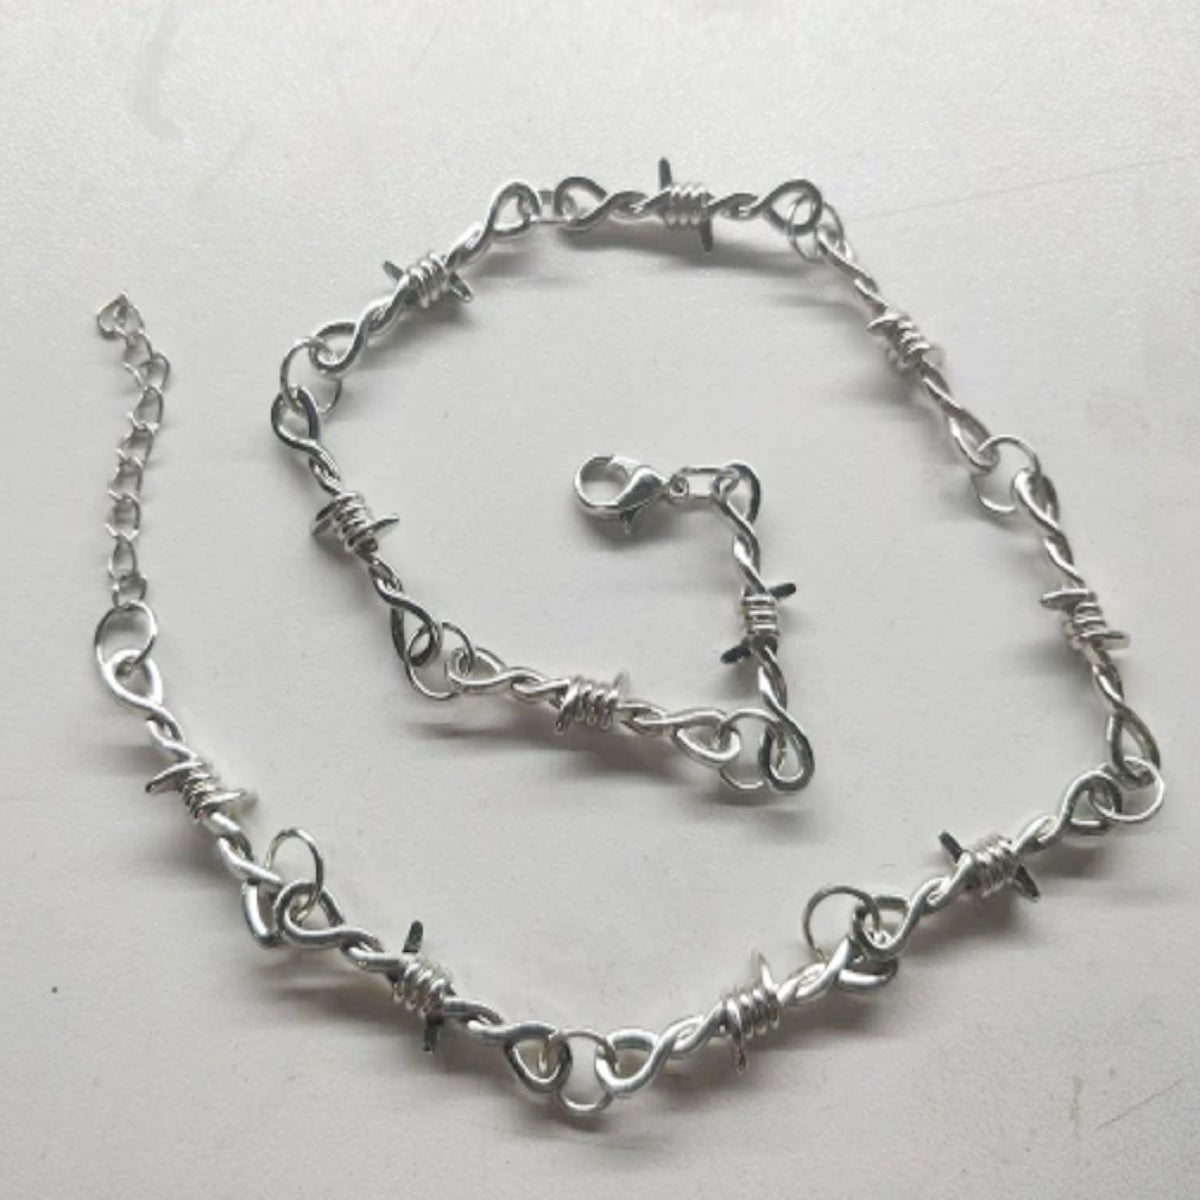 Unisex Exquisite Designed Barbed Wire Chain Necklace - Silver Coated